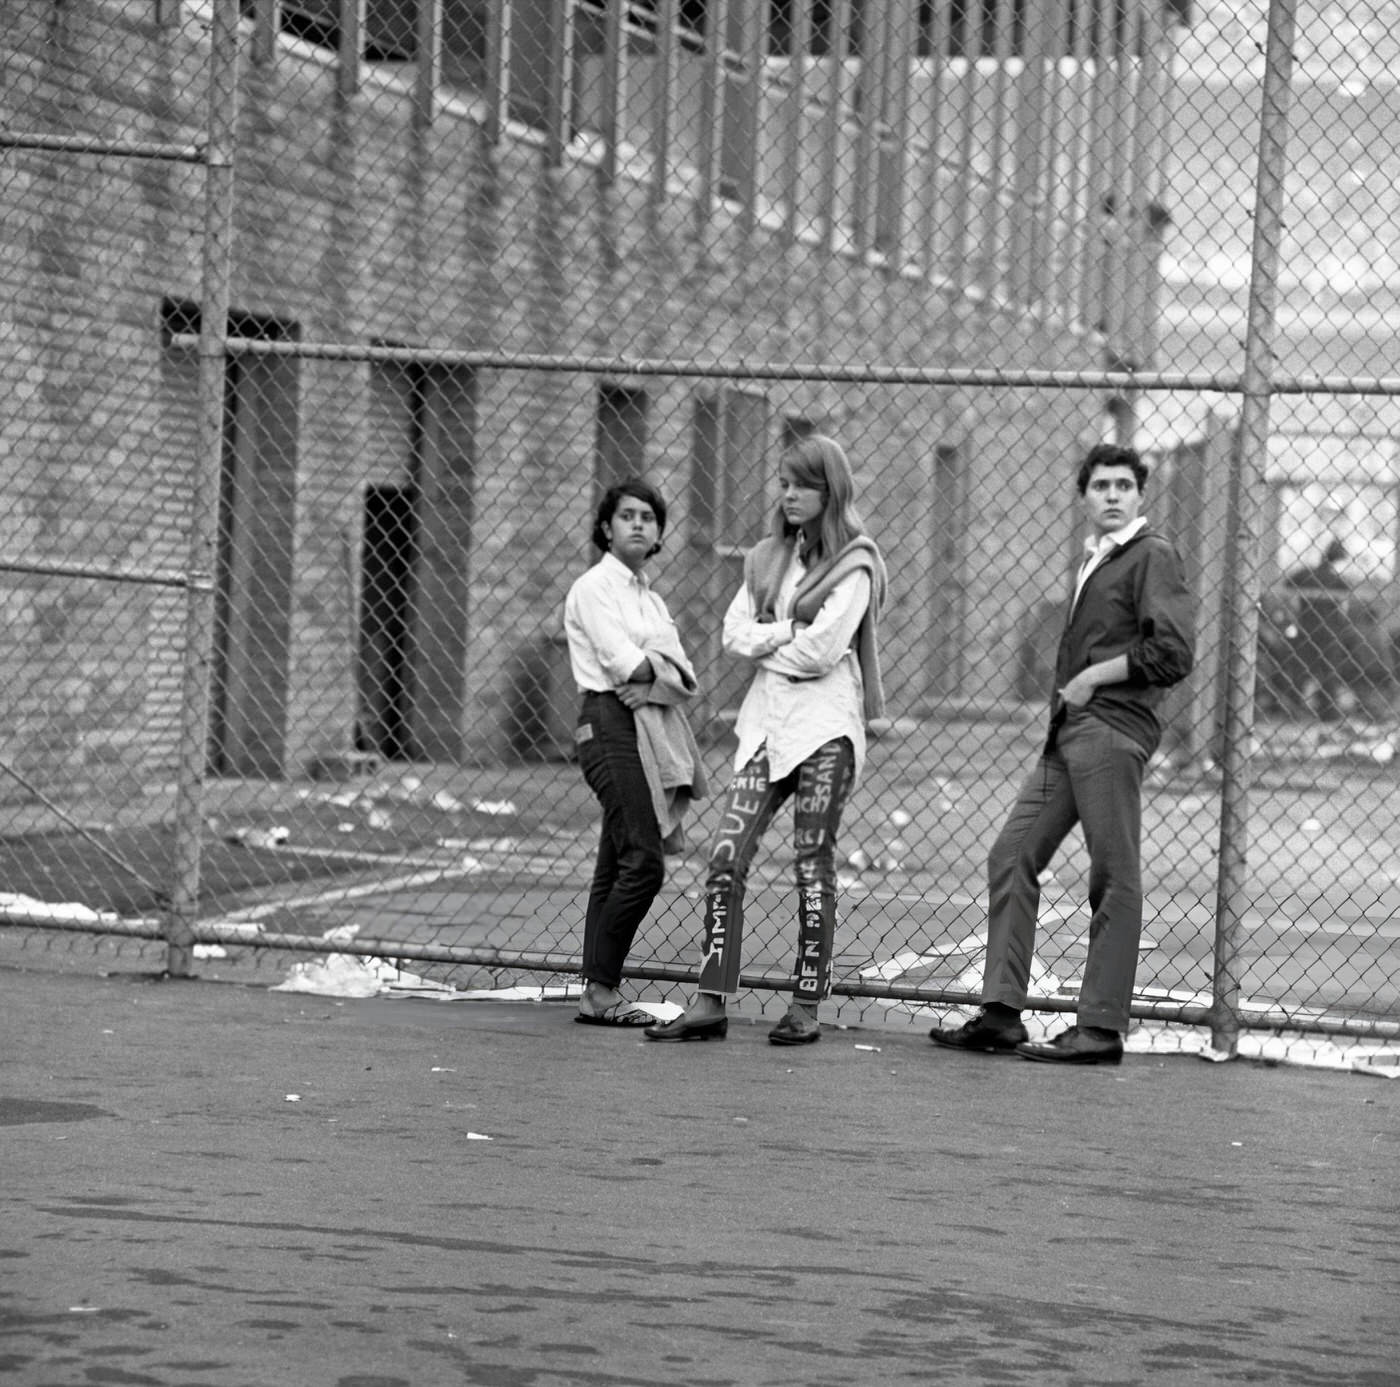 Three Somber-Looking Fans Unable To Attend The Beatles Concert Stand By A Fence Around The Back Of Shea Stadium, 1966.